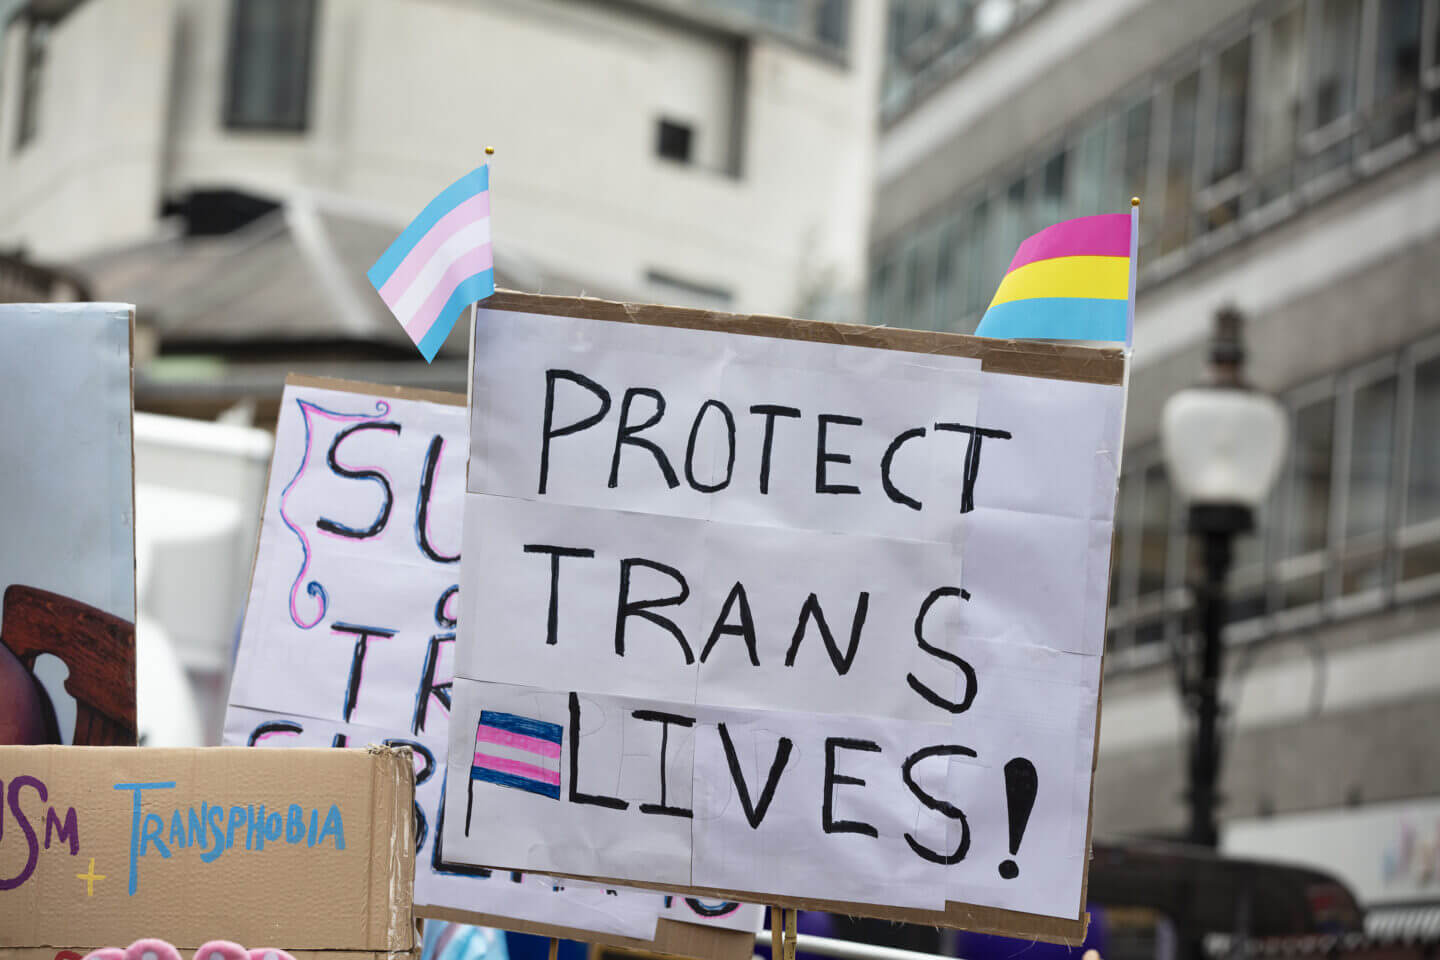 A close-up of a protest sign decorated in transgender and pansexual pride flags that reads, “Protect Trans Lives!”